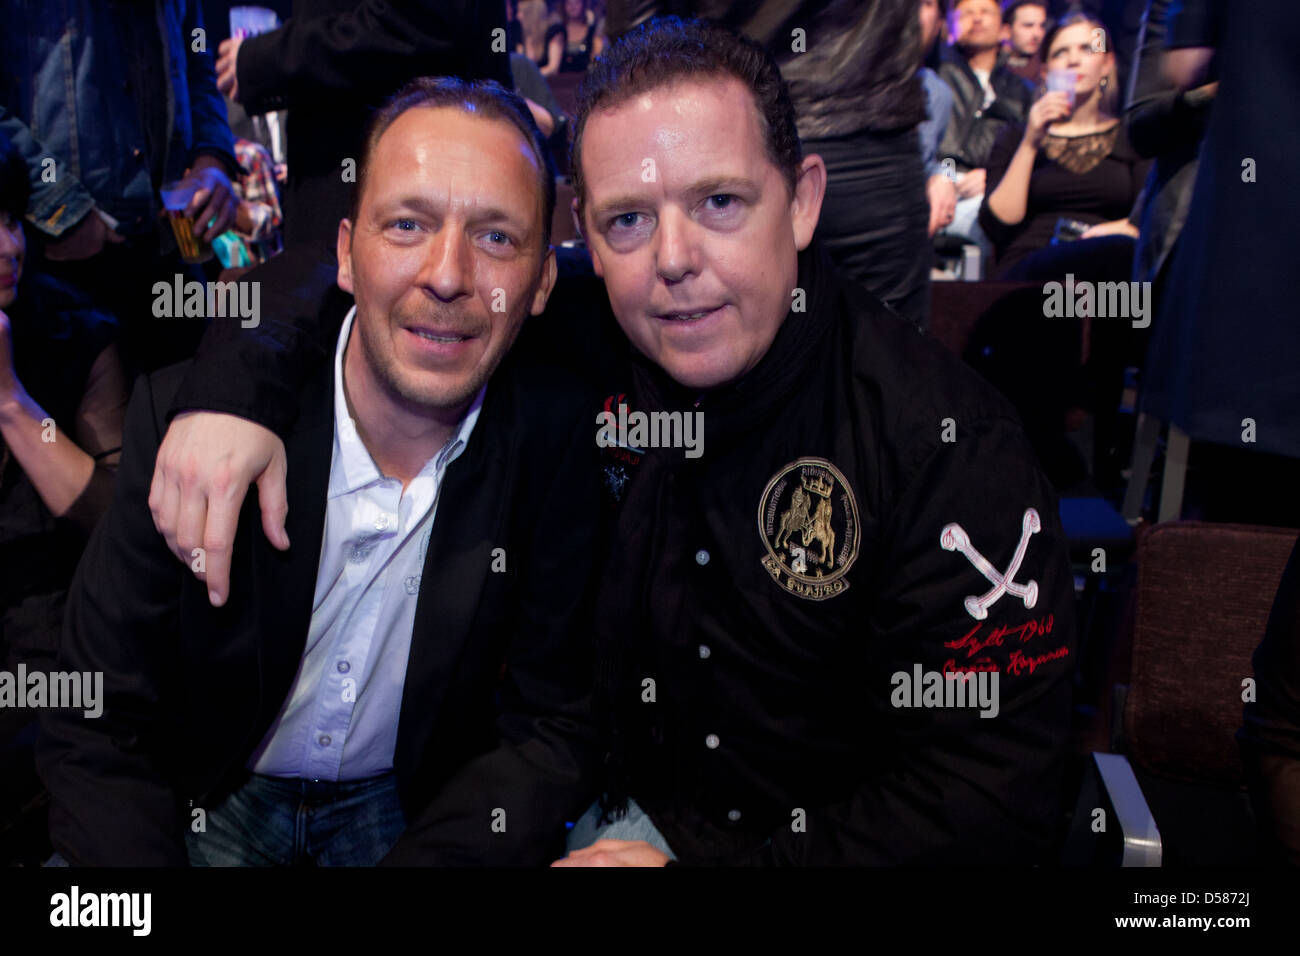 Toto, Harry at 1Live Krone Awards at Jahrhunderthalle - aftershow party. Bochum, Germany - 08.12.2011 Stock Photo